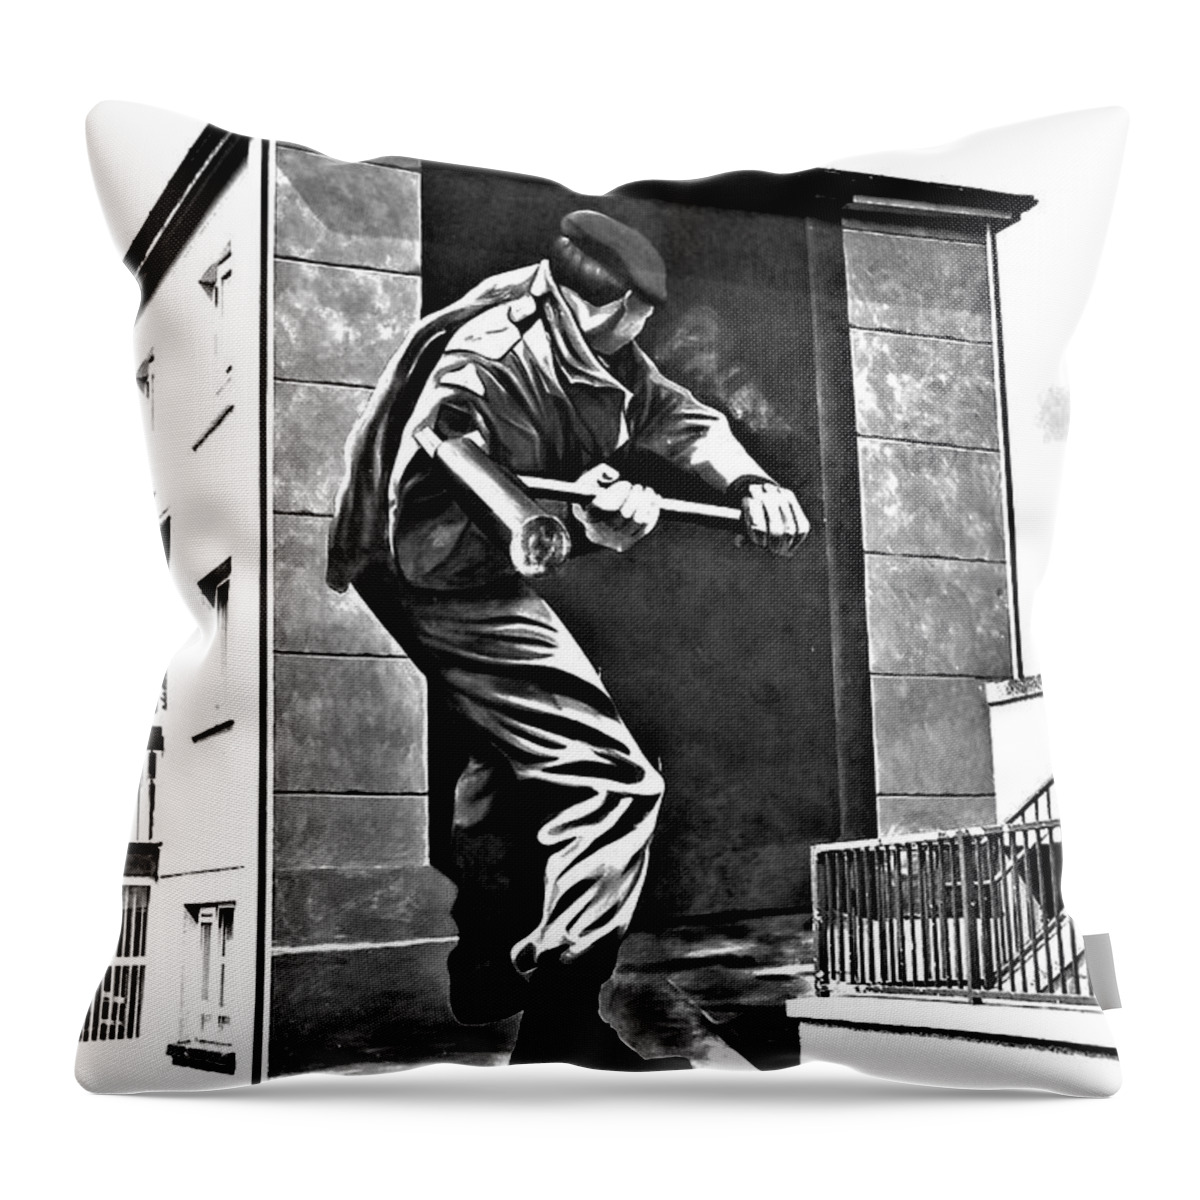 Derry Murals Throw Pillow featuring the photograph Forced Entry Derry Mural by Nina Ficur Feenan